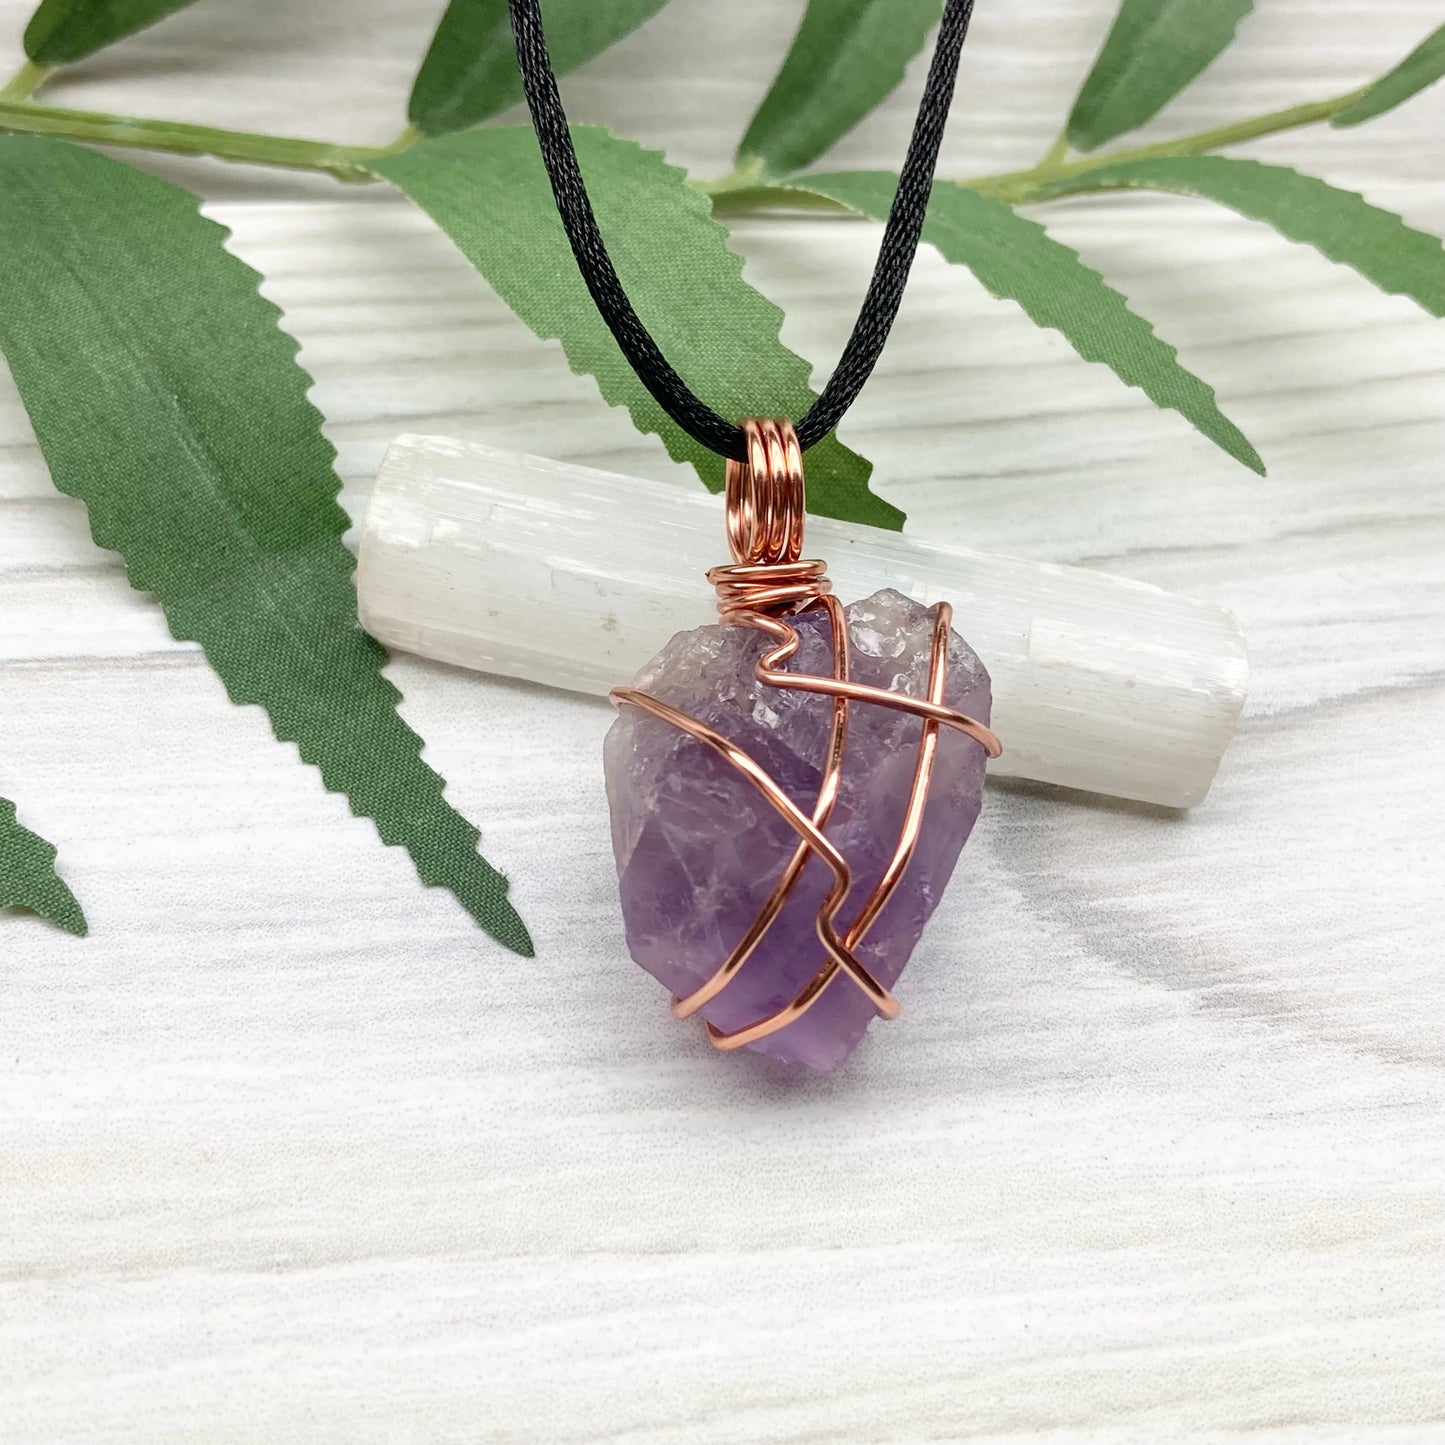 Raw Amethyst Necklace. Natural Purple Amethyst Crystal Wrapped With Tarnish Resistant Copper Wire. Purple Stone Pendant. Comes On A Black Necklace. Aquarius Zodiac Crystal Jewelry. Handmade In Tennessee.